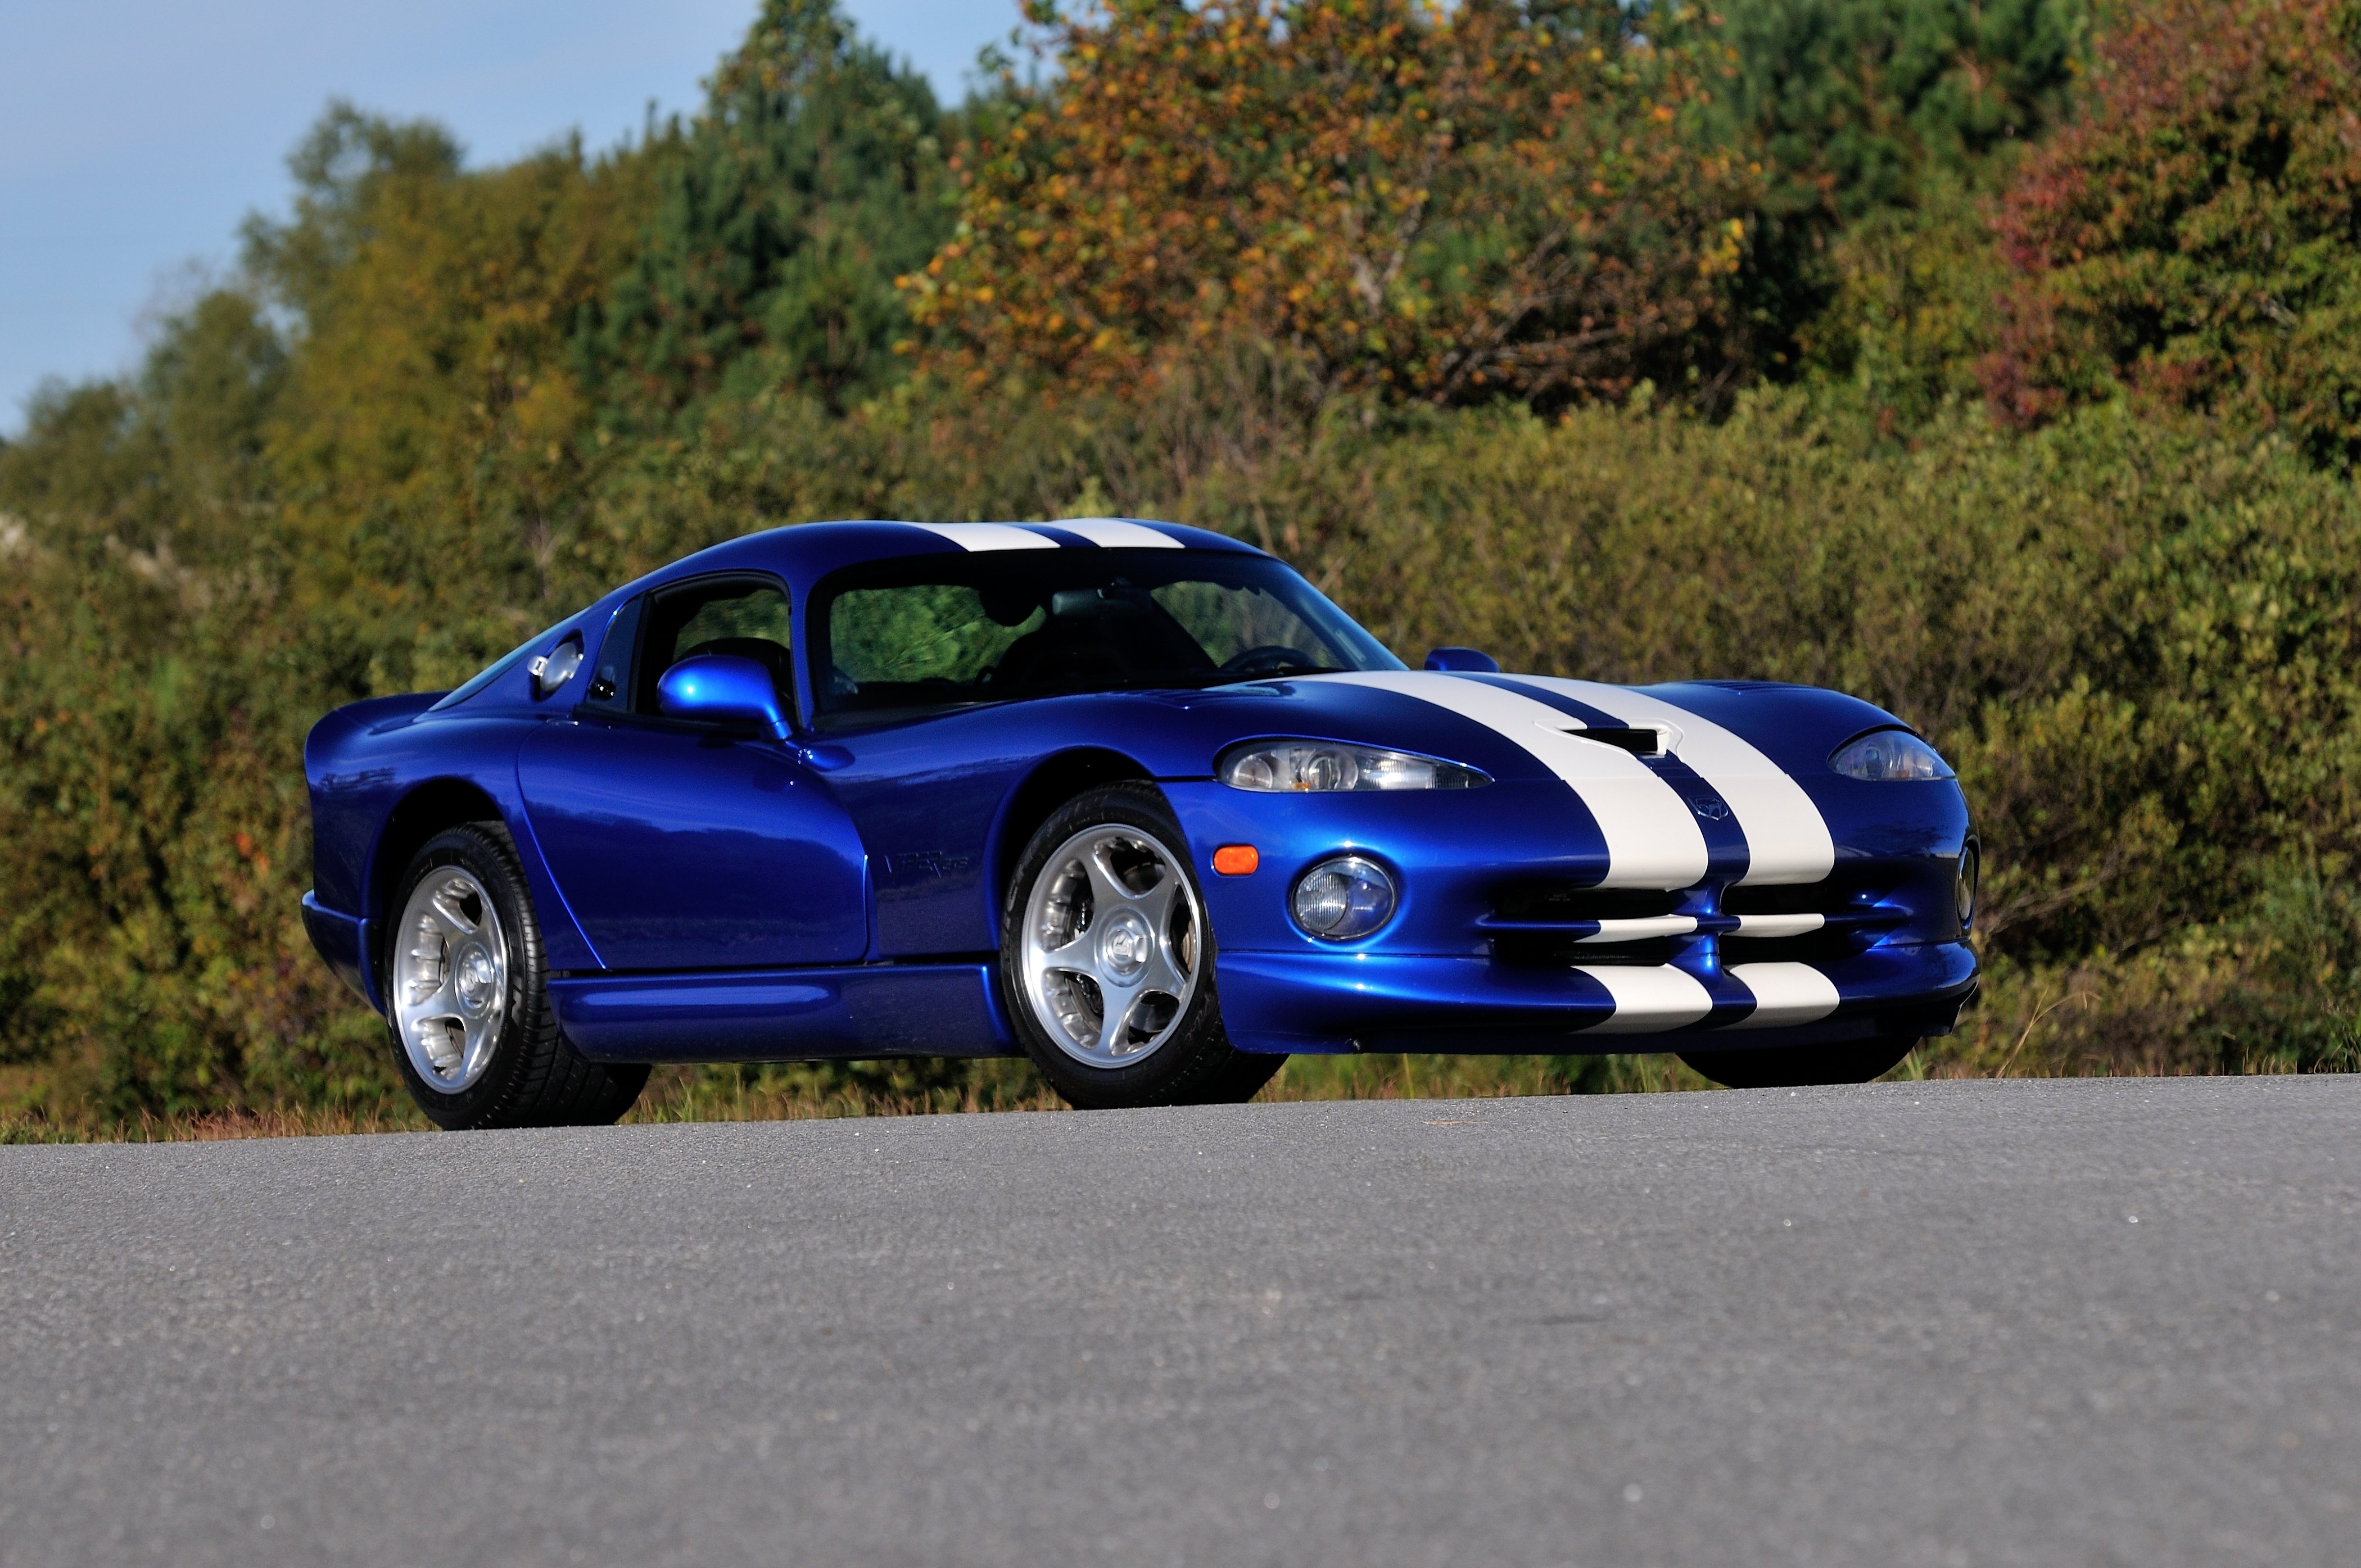 1996, Dodge, Viper, Gts, Coupe, Muscle, Supercar, Usa, 4200x2790 05 Wallpaper